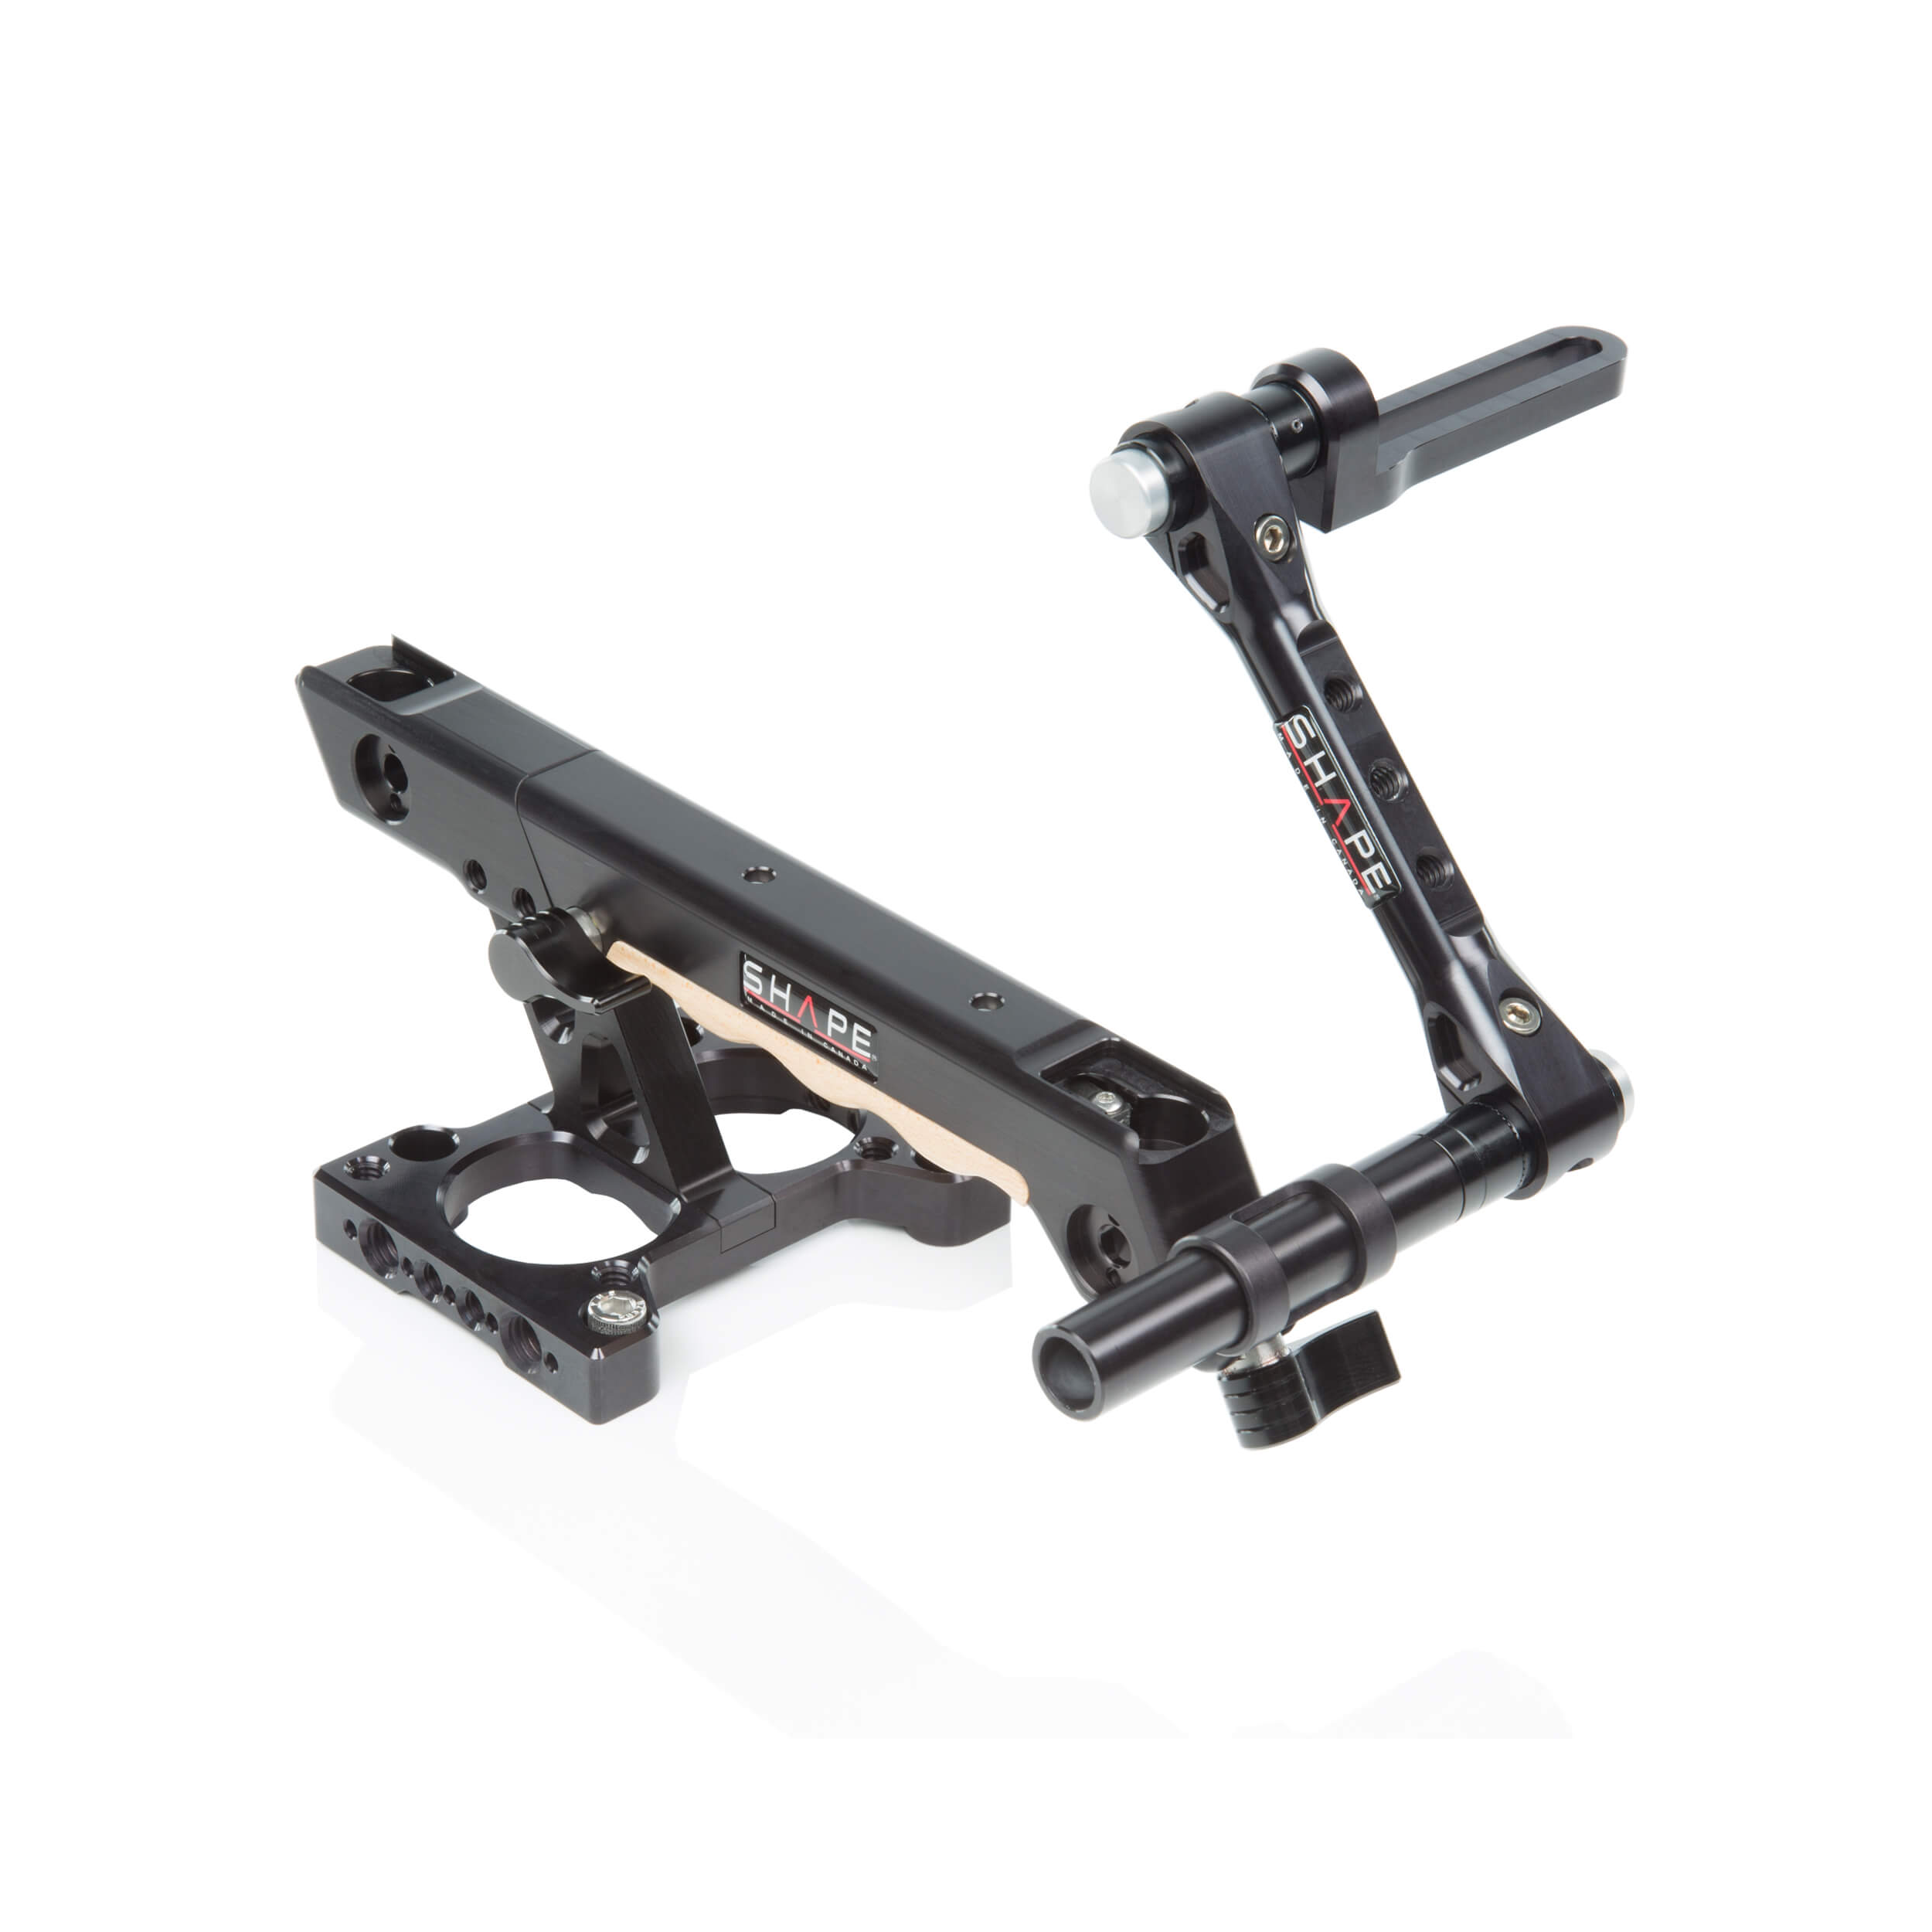 SHAPE Top Plate Extendable Handle & EVF Mount for Select RED Cameras